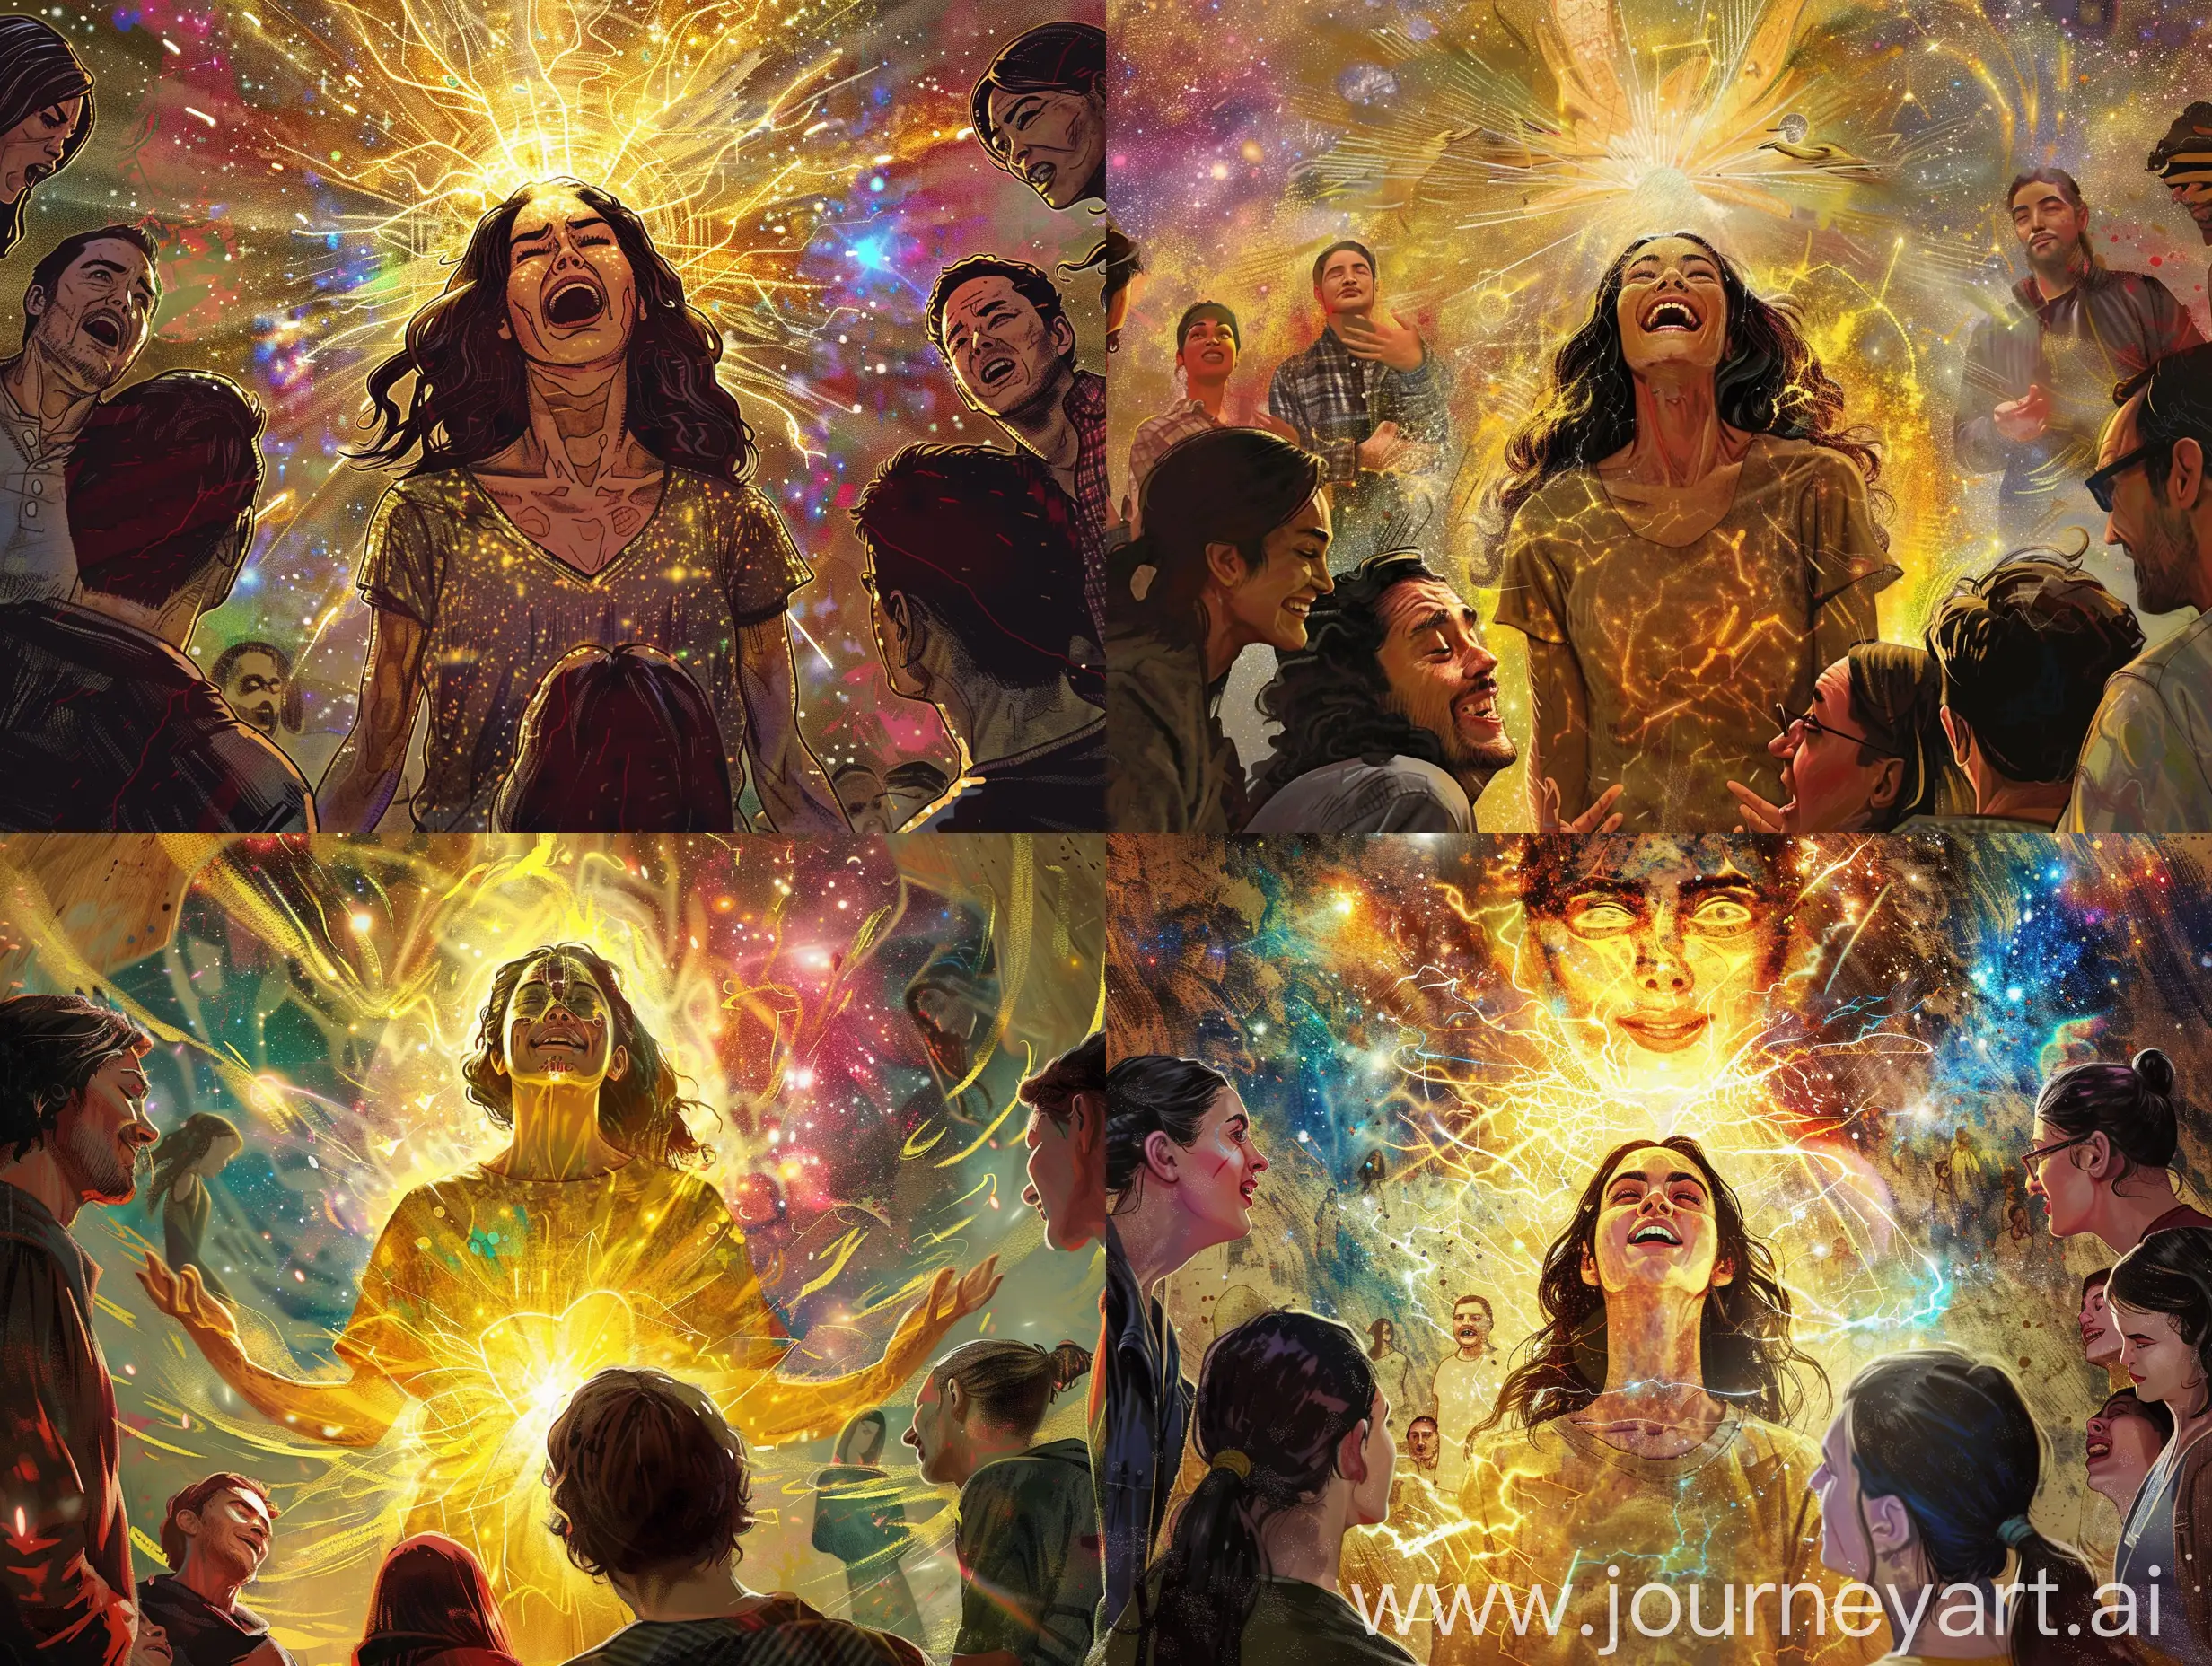 Radiant-Woman-Surrounded-by-Negative-Energy-in-Vibrant-Cosmic-Scene